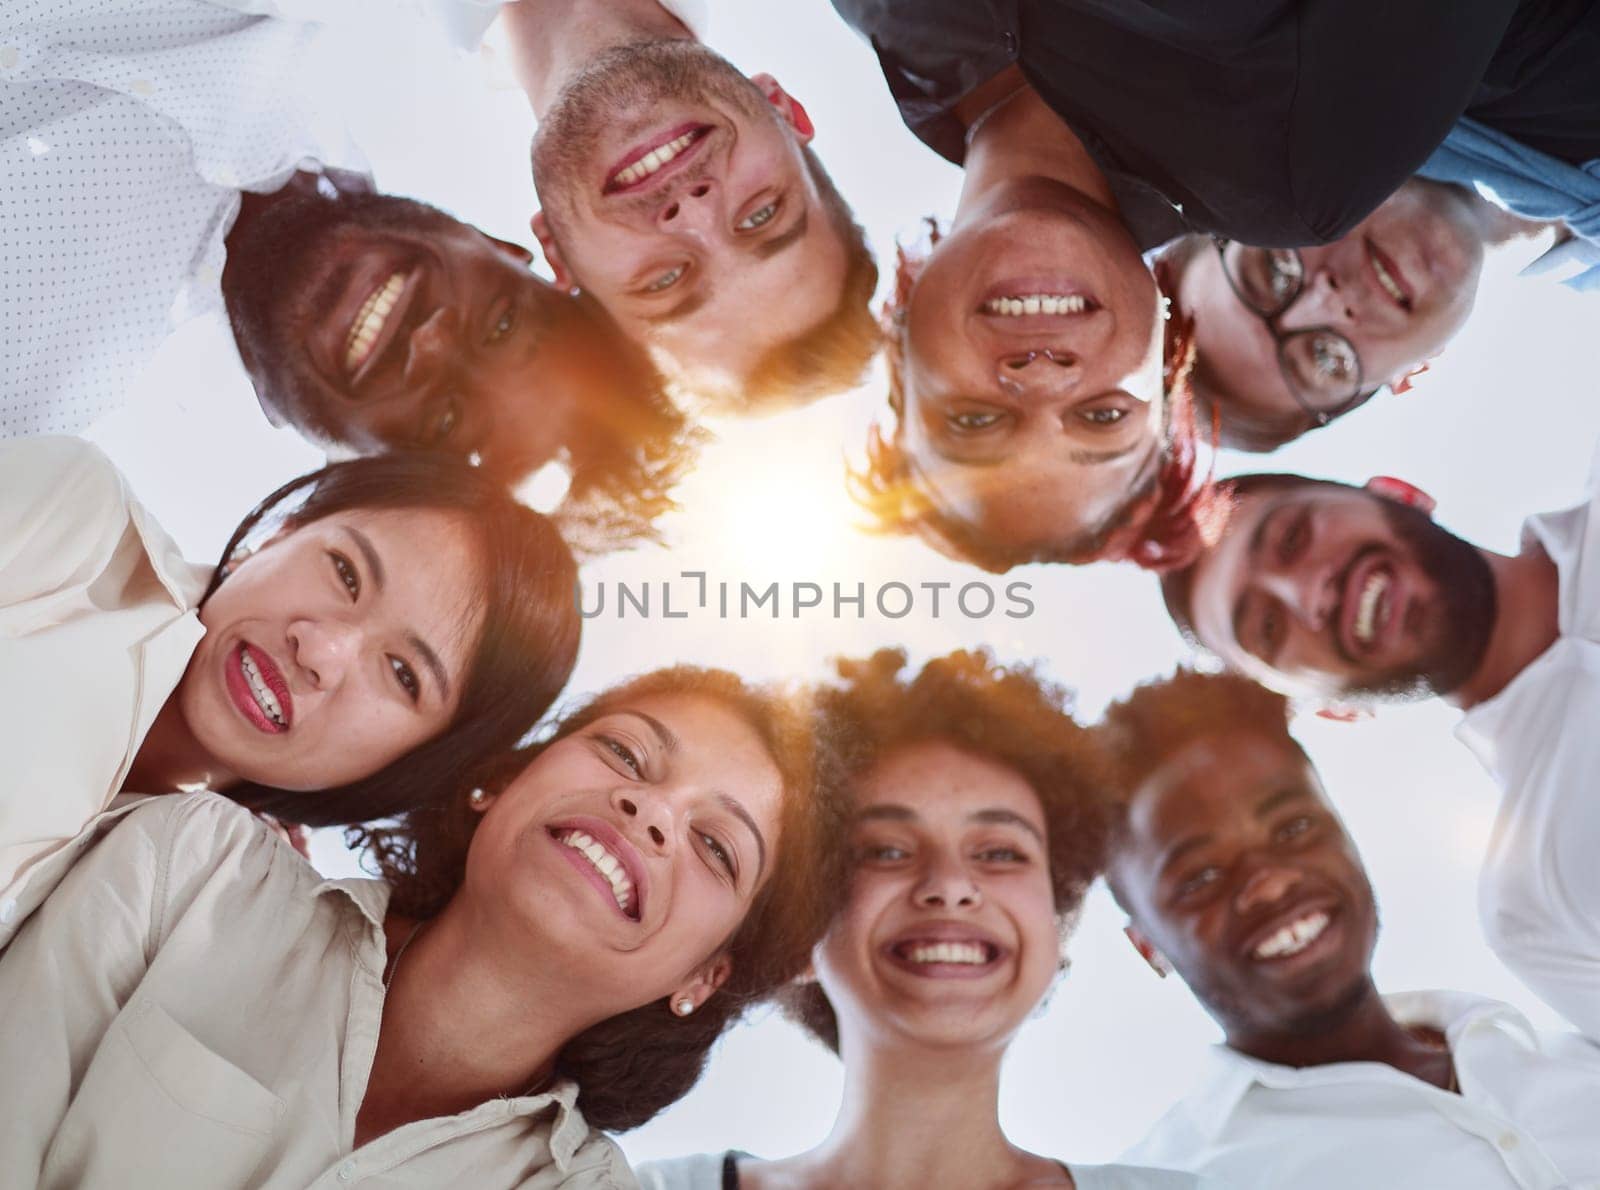 Selfie of young smiling businessmen having fun together